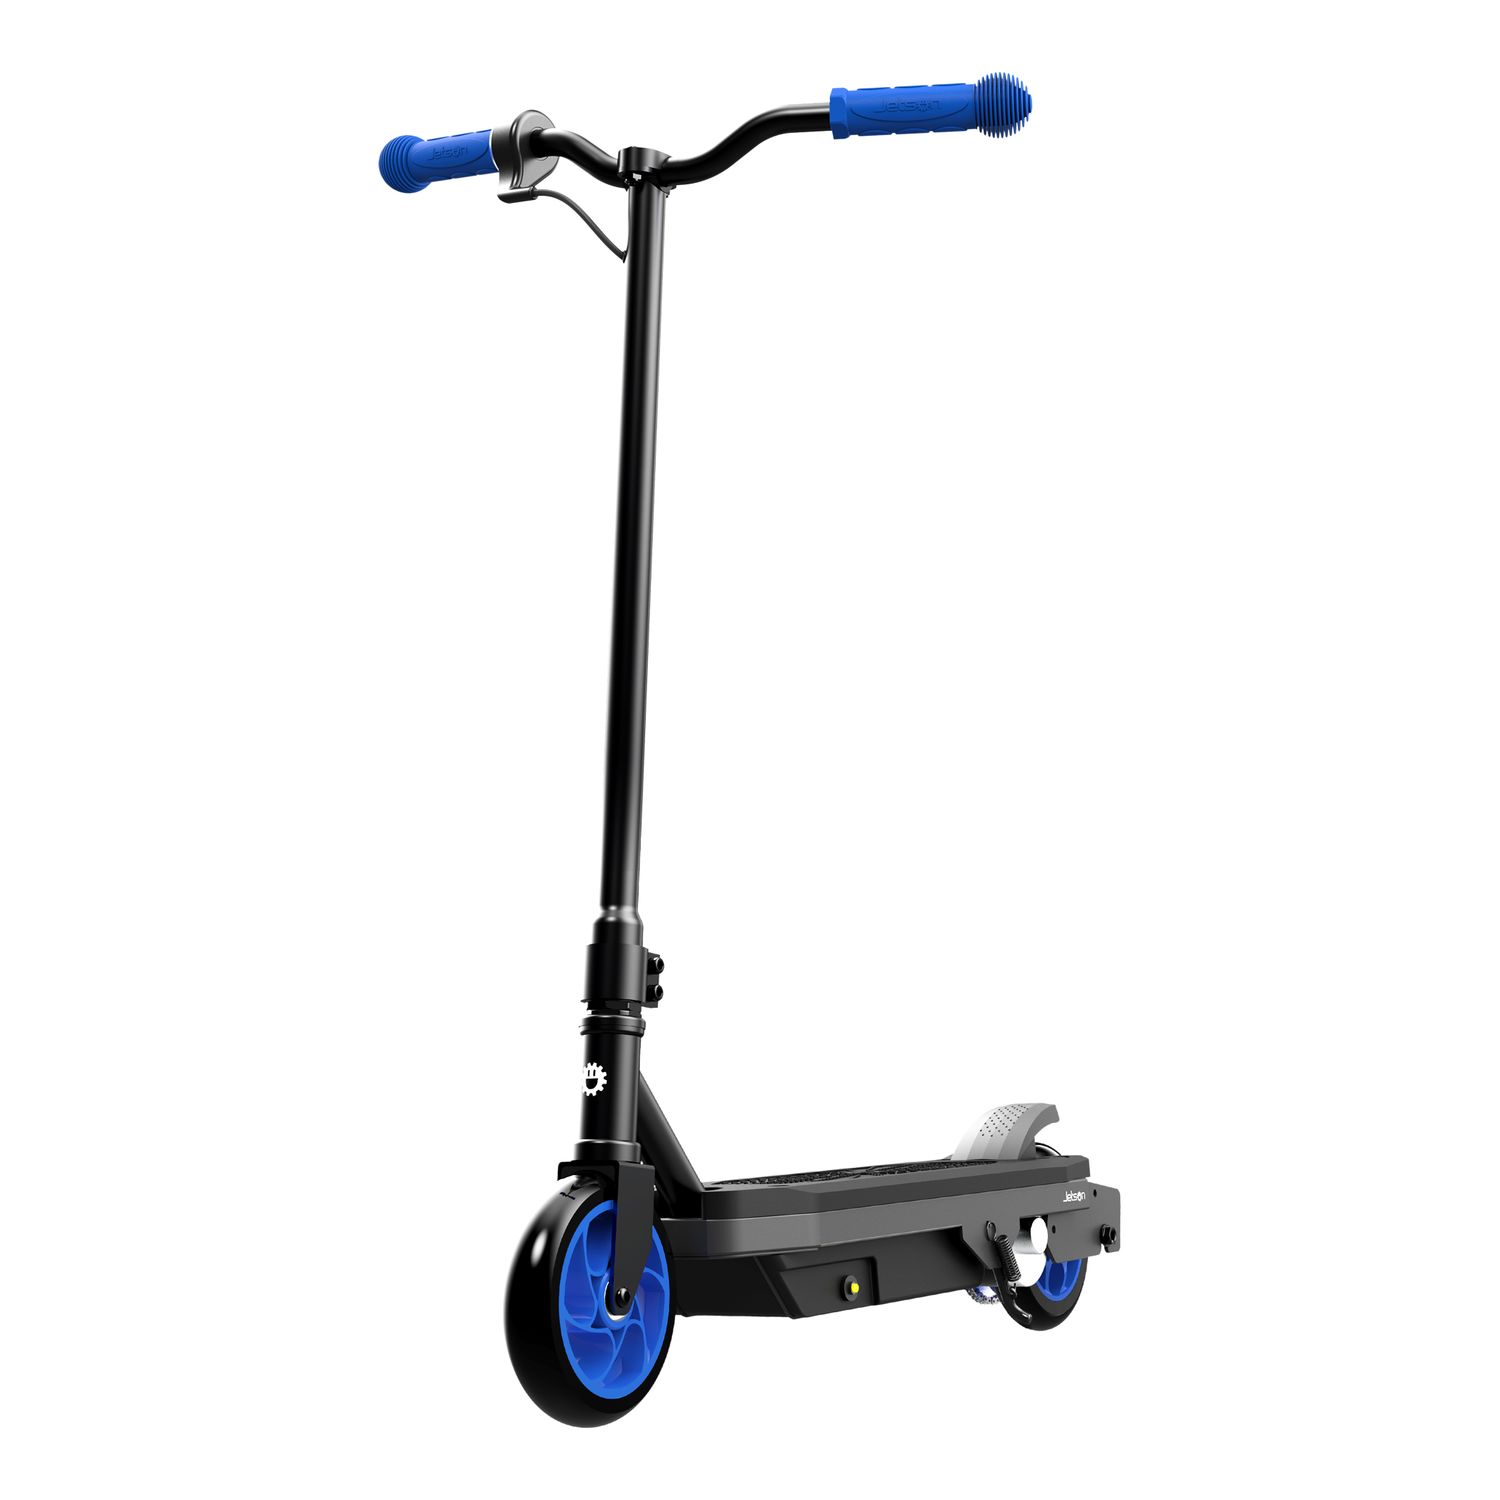 motorized scooter for kids